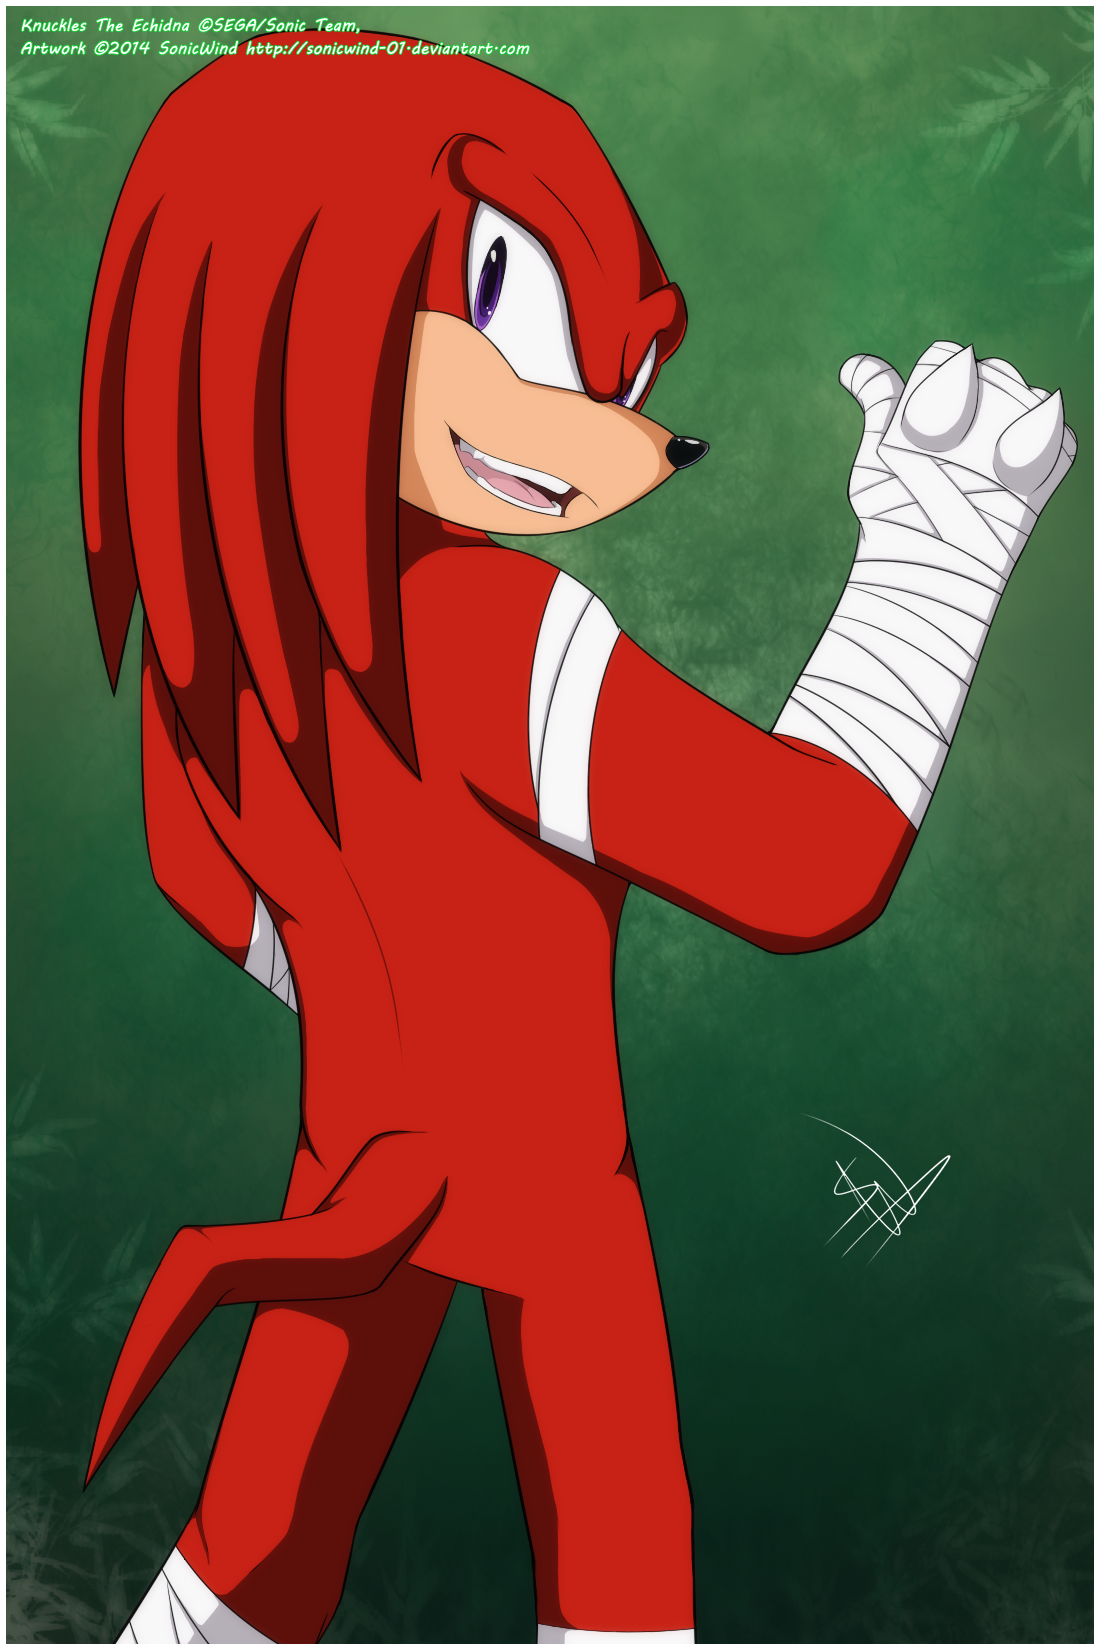 SB Knuckles The Echidna By SonicWind 01 On DeviantArt.